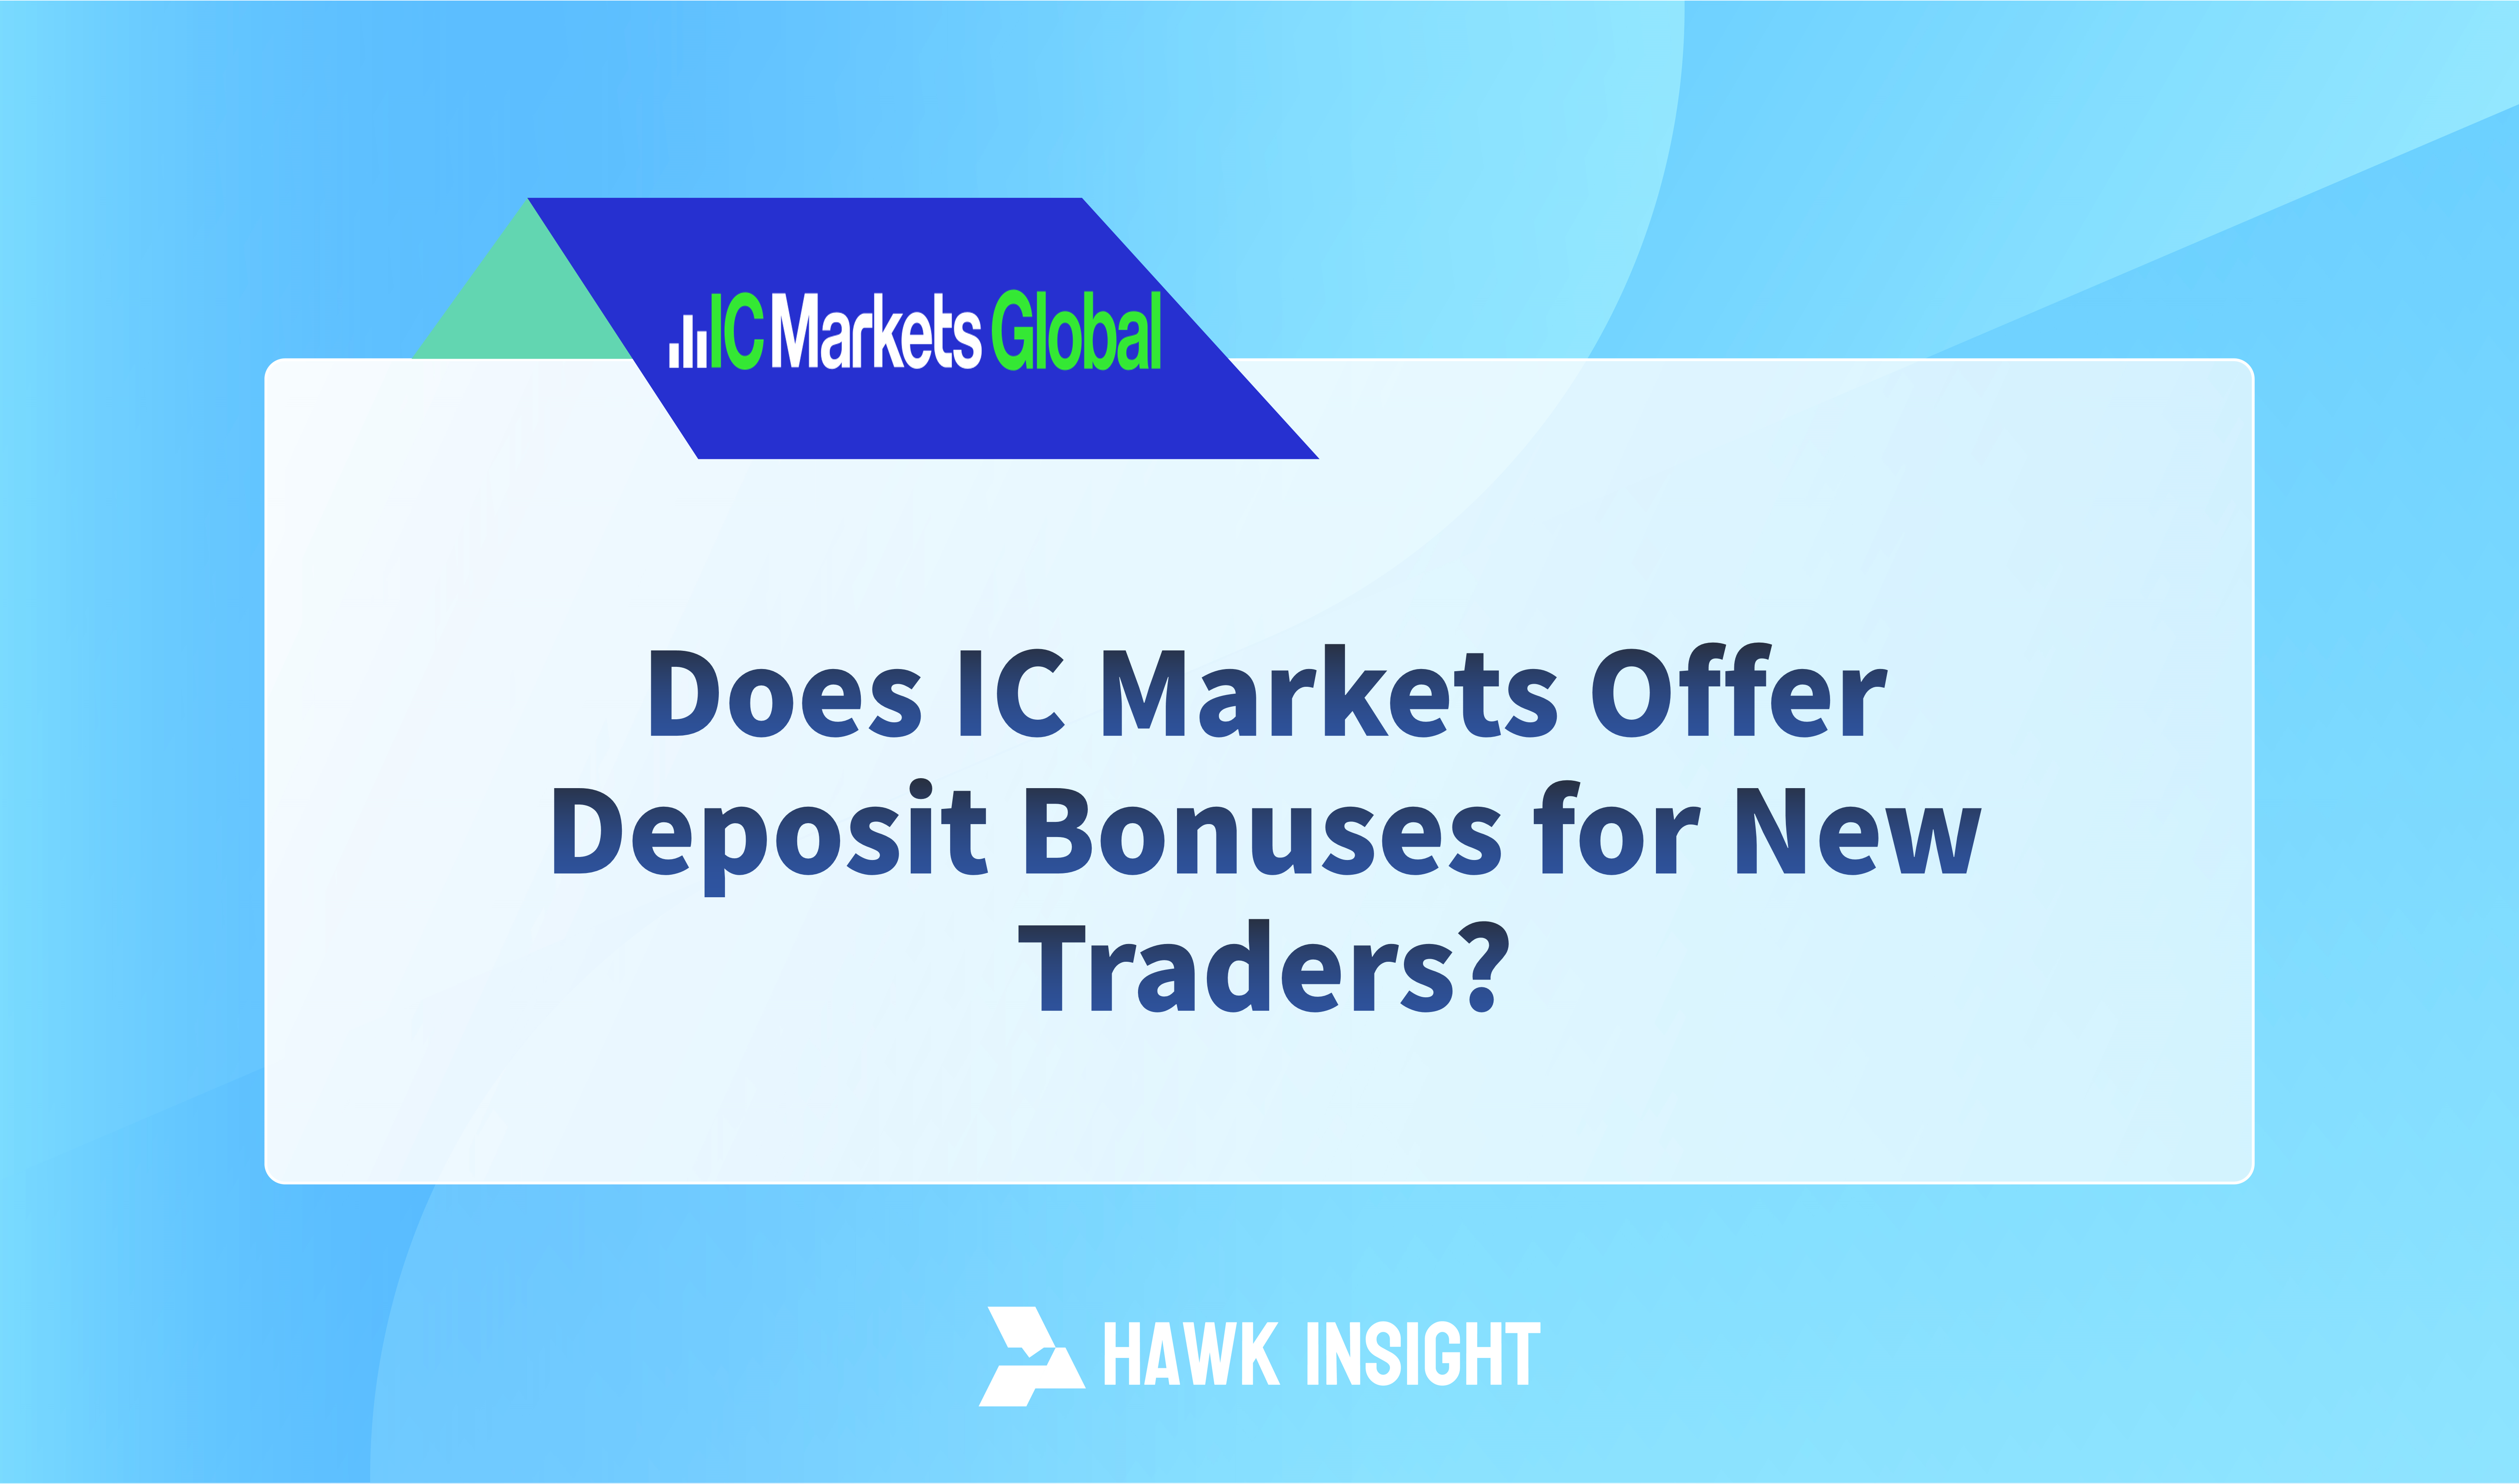 Does IC Markets Offer Deposit Bonuses for New Traders?